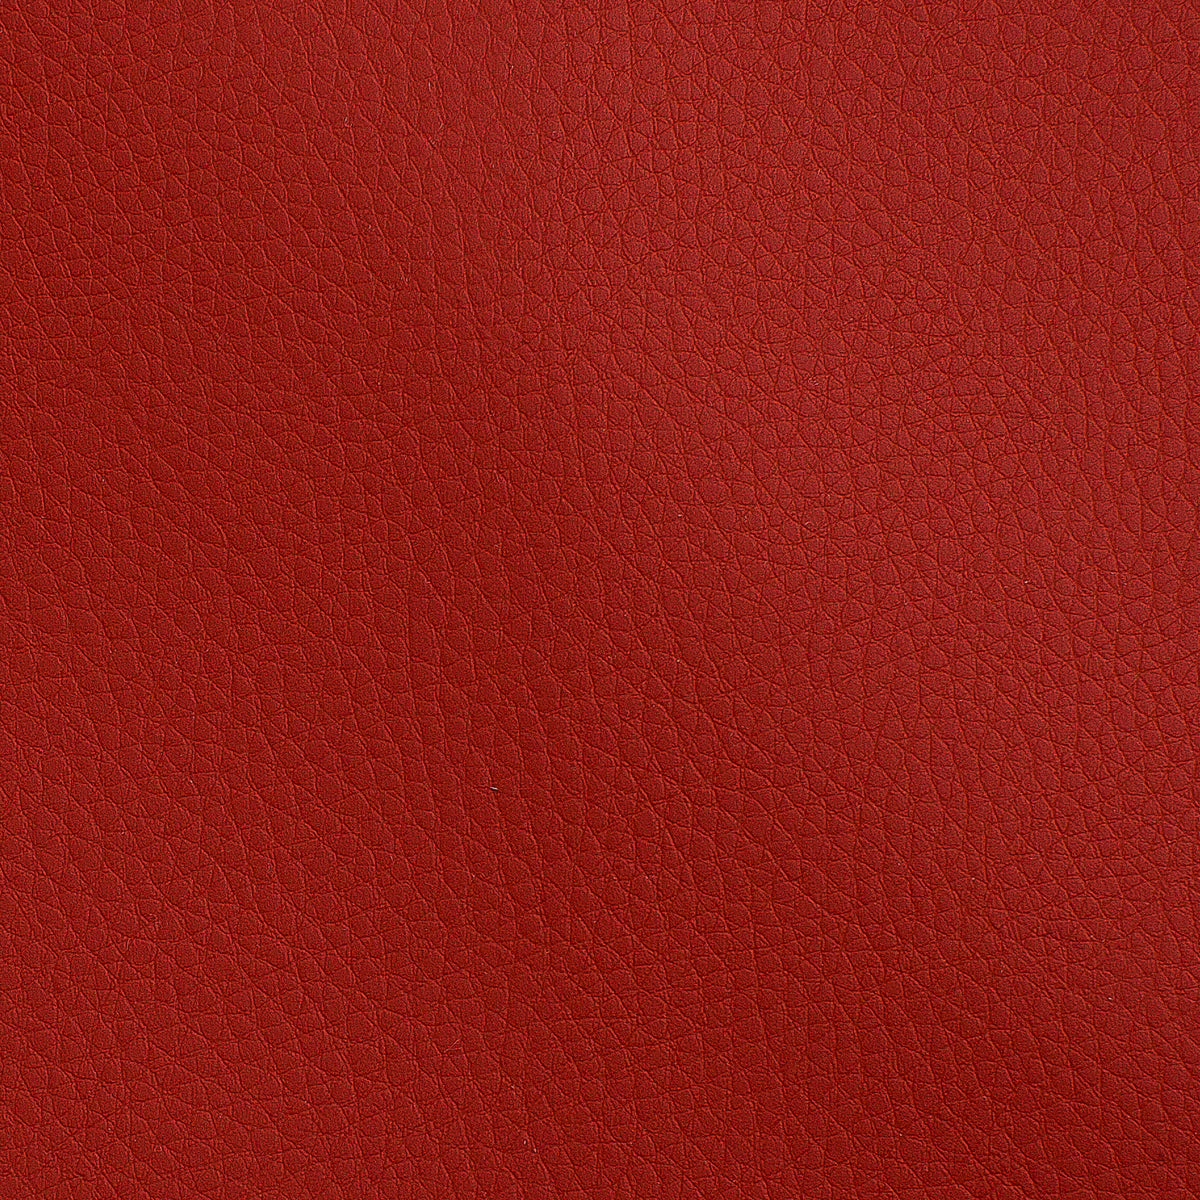 Premier-310 Cherry Leatherette by Sileather